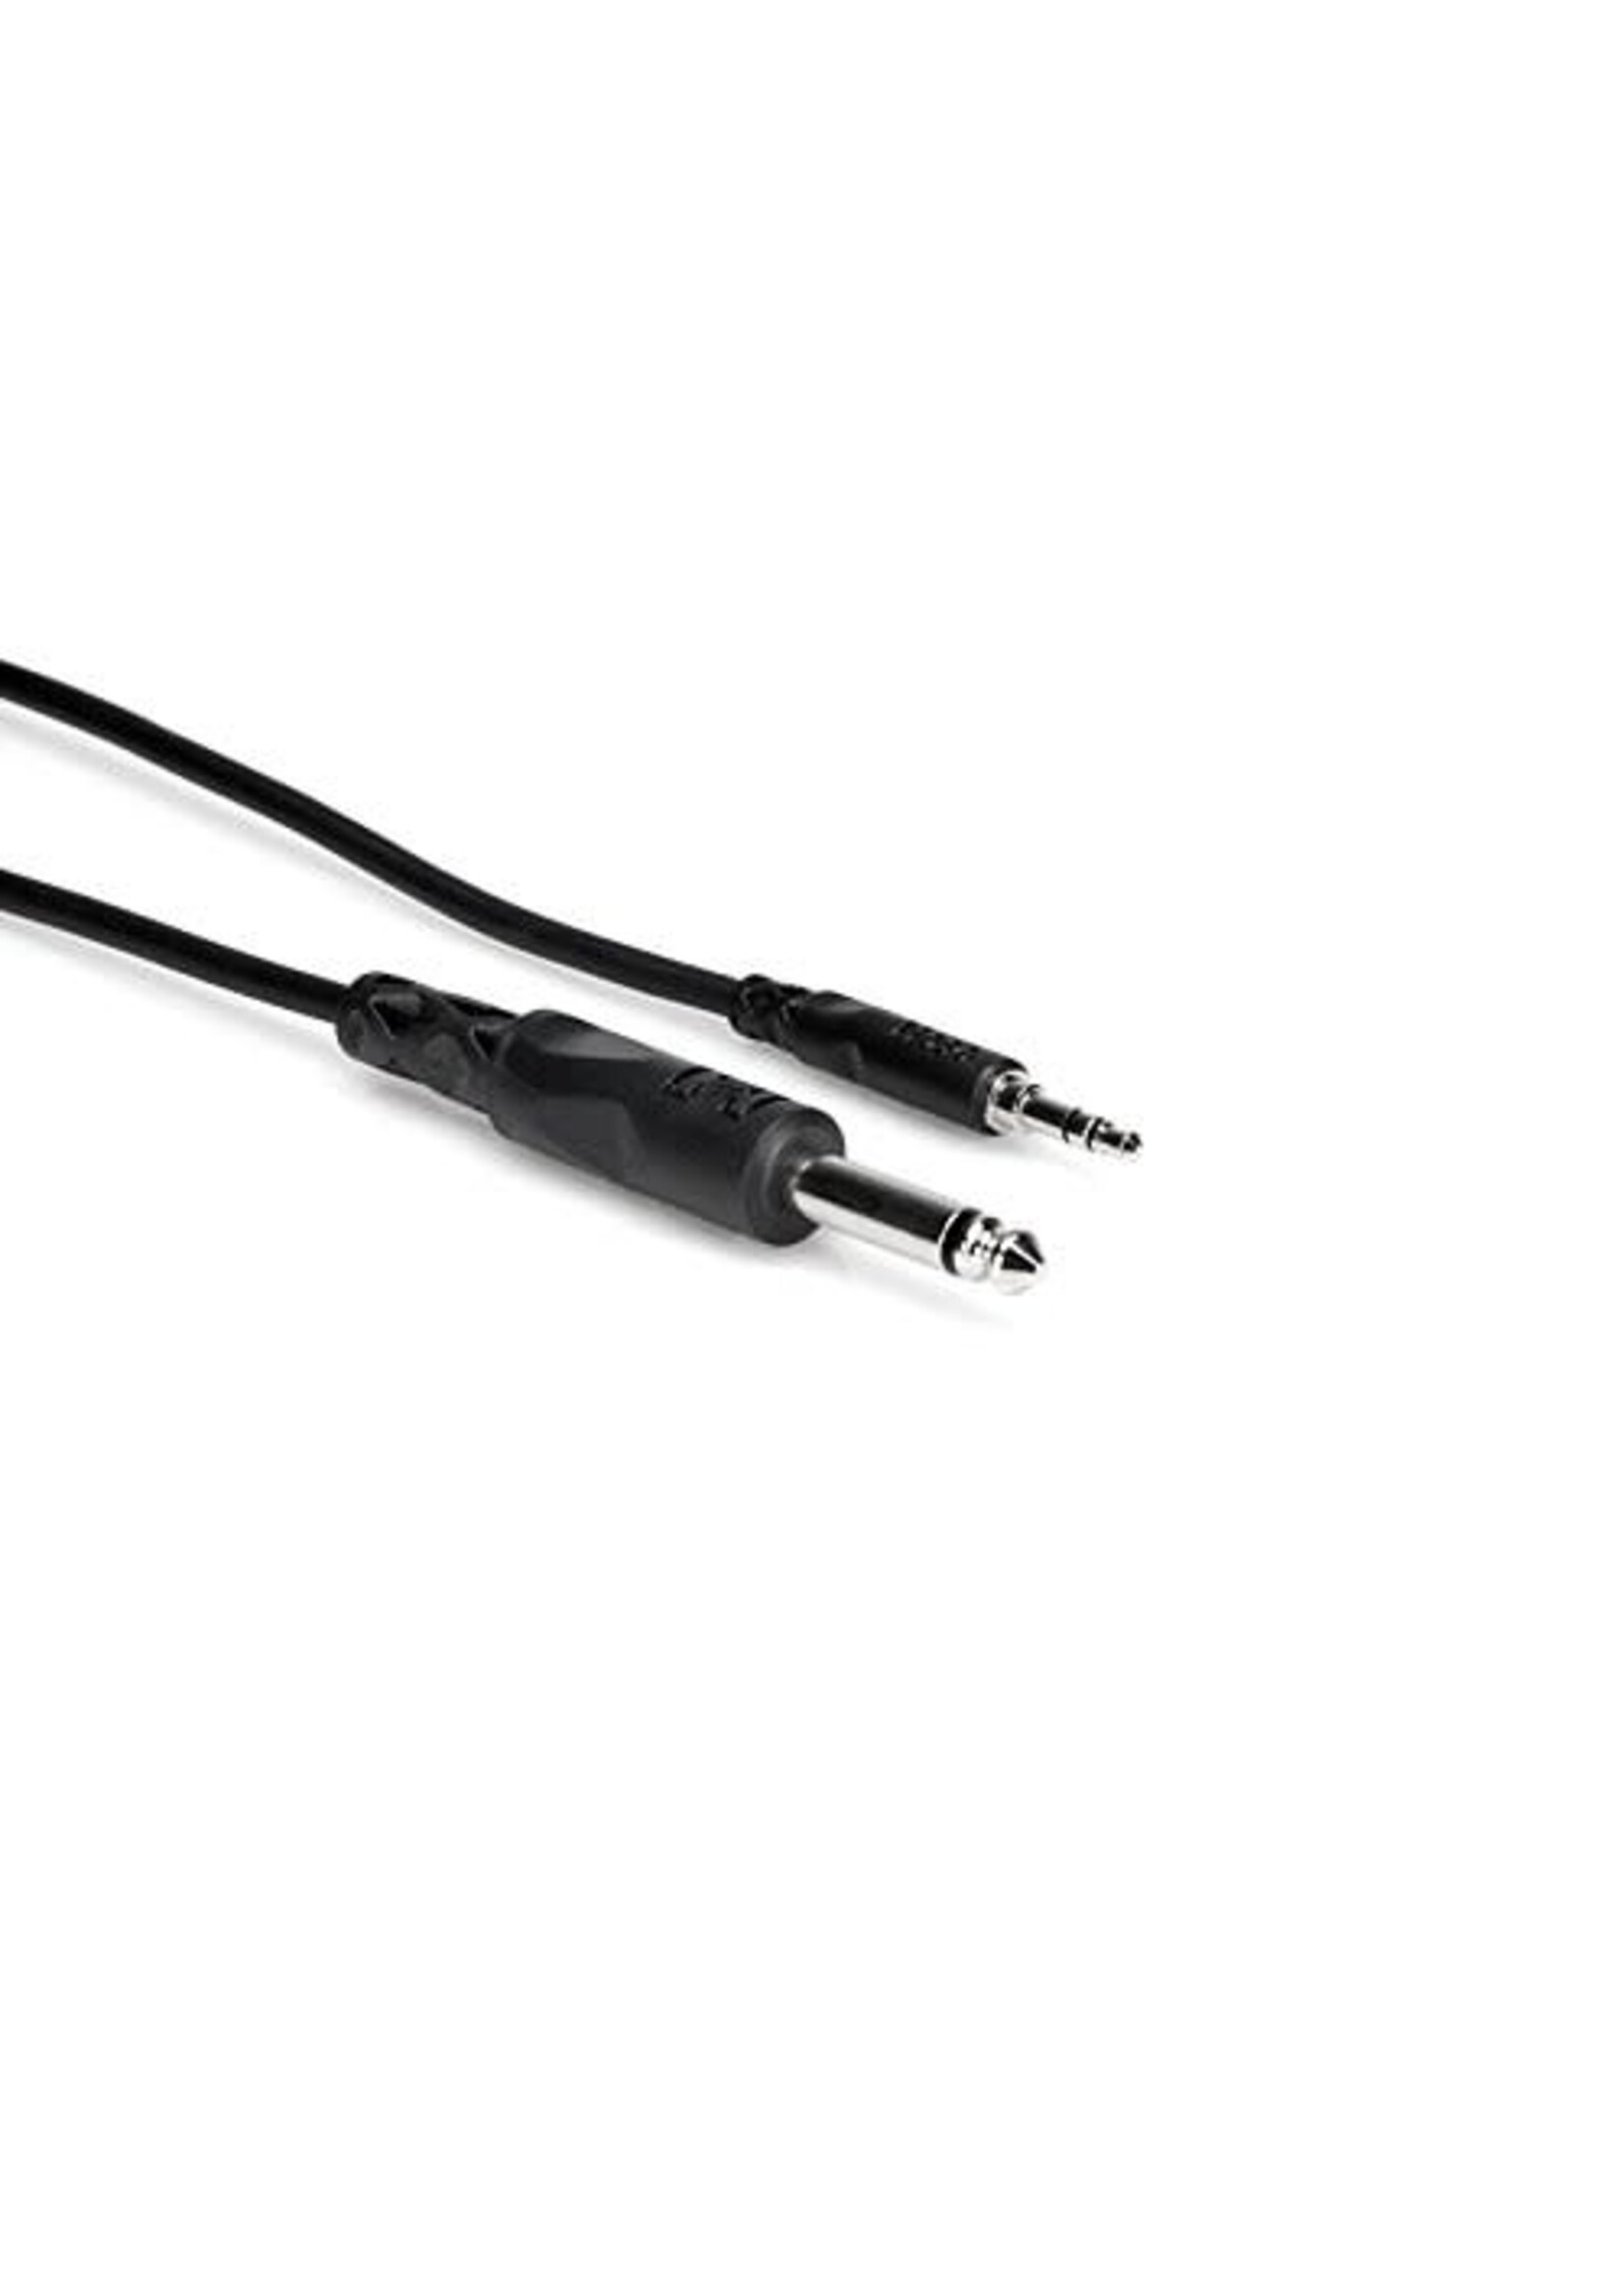 Hosa Hosa CMP-103 Interconnect Cable - 3.5mm TRS Male to 1/4-inch TS Male - 3 Foot